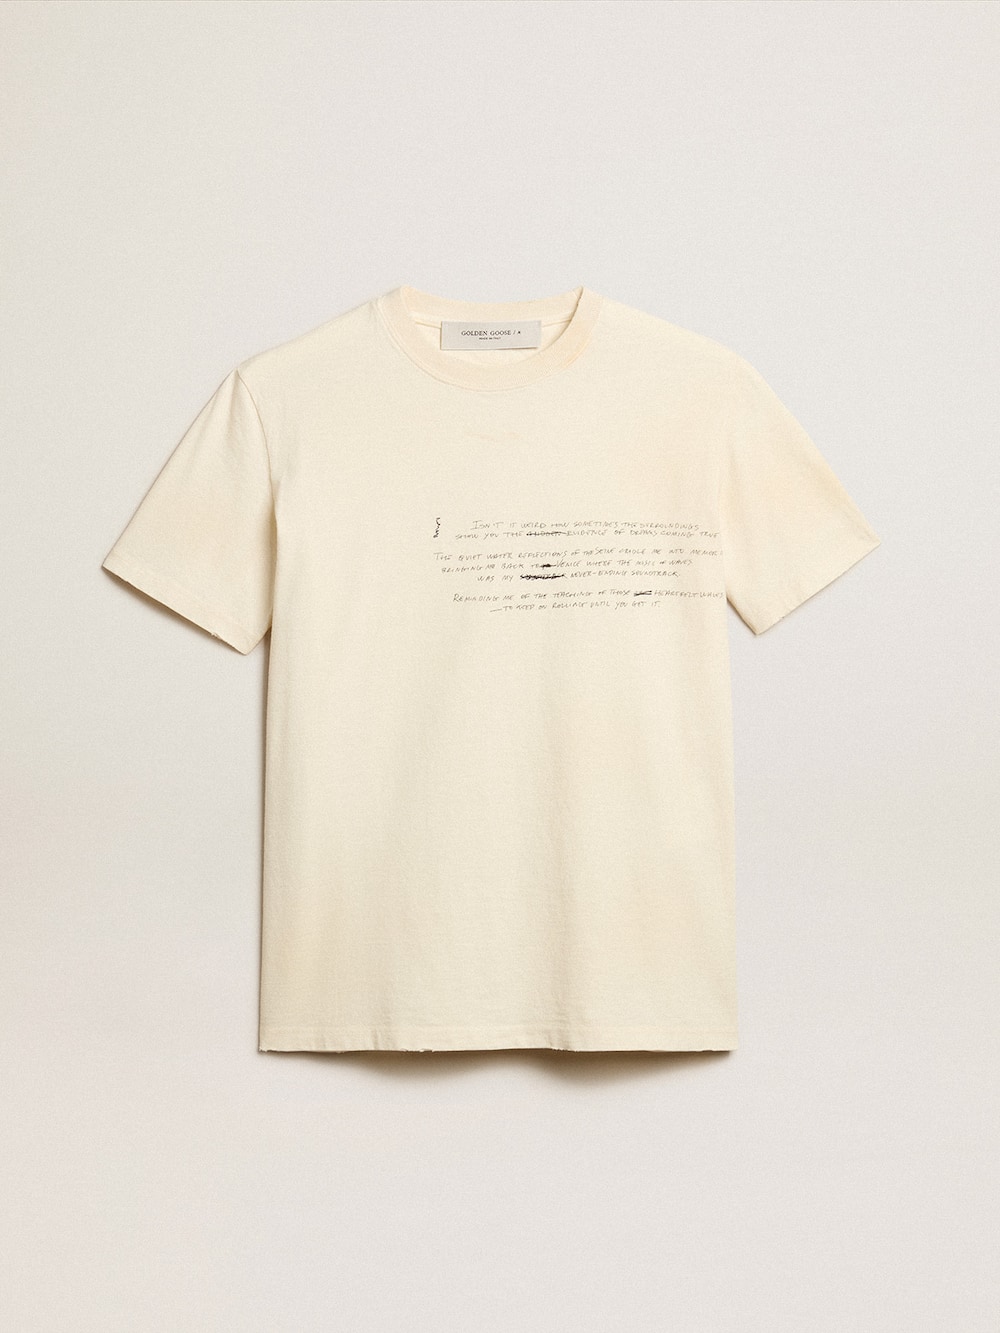 Golden Goose - Women’s cotton T-shirt in aged white with embroidered lettering in 